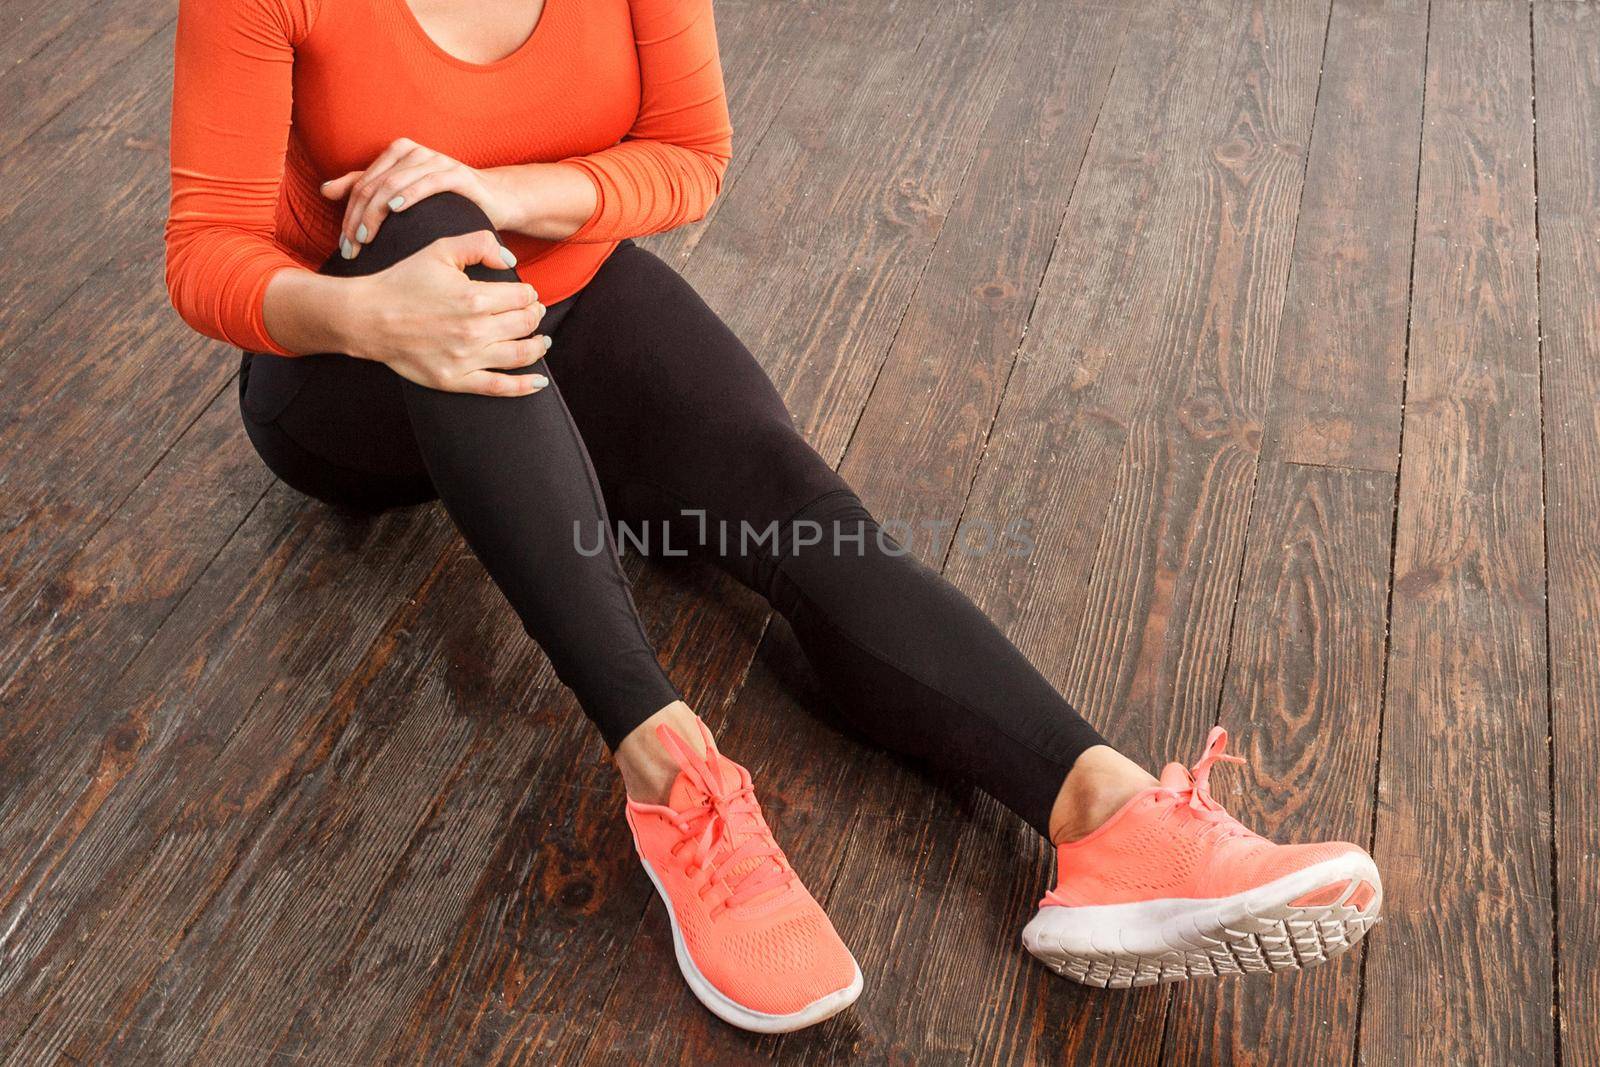 Fit woman in tight sportswear holding painful knee sitting on floor at home gym, suffering muscle strain, sprain ligaments or joint injury, health problems after sports training. indoor studio shot